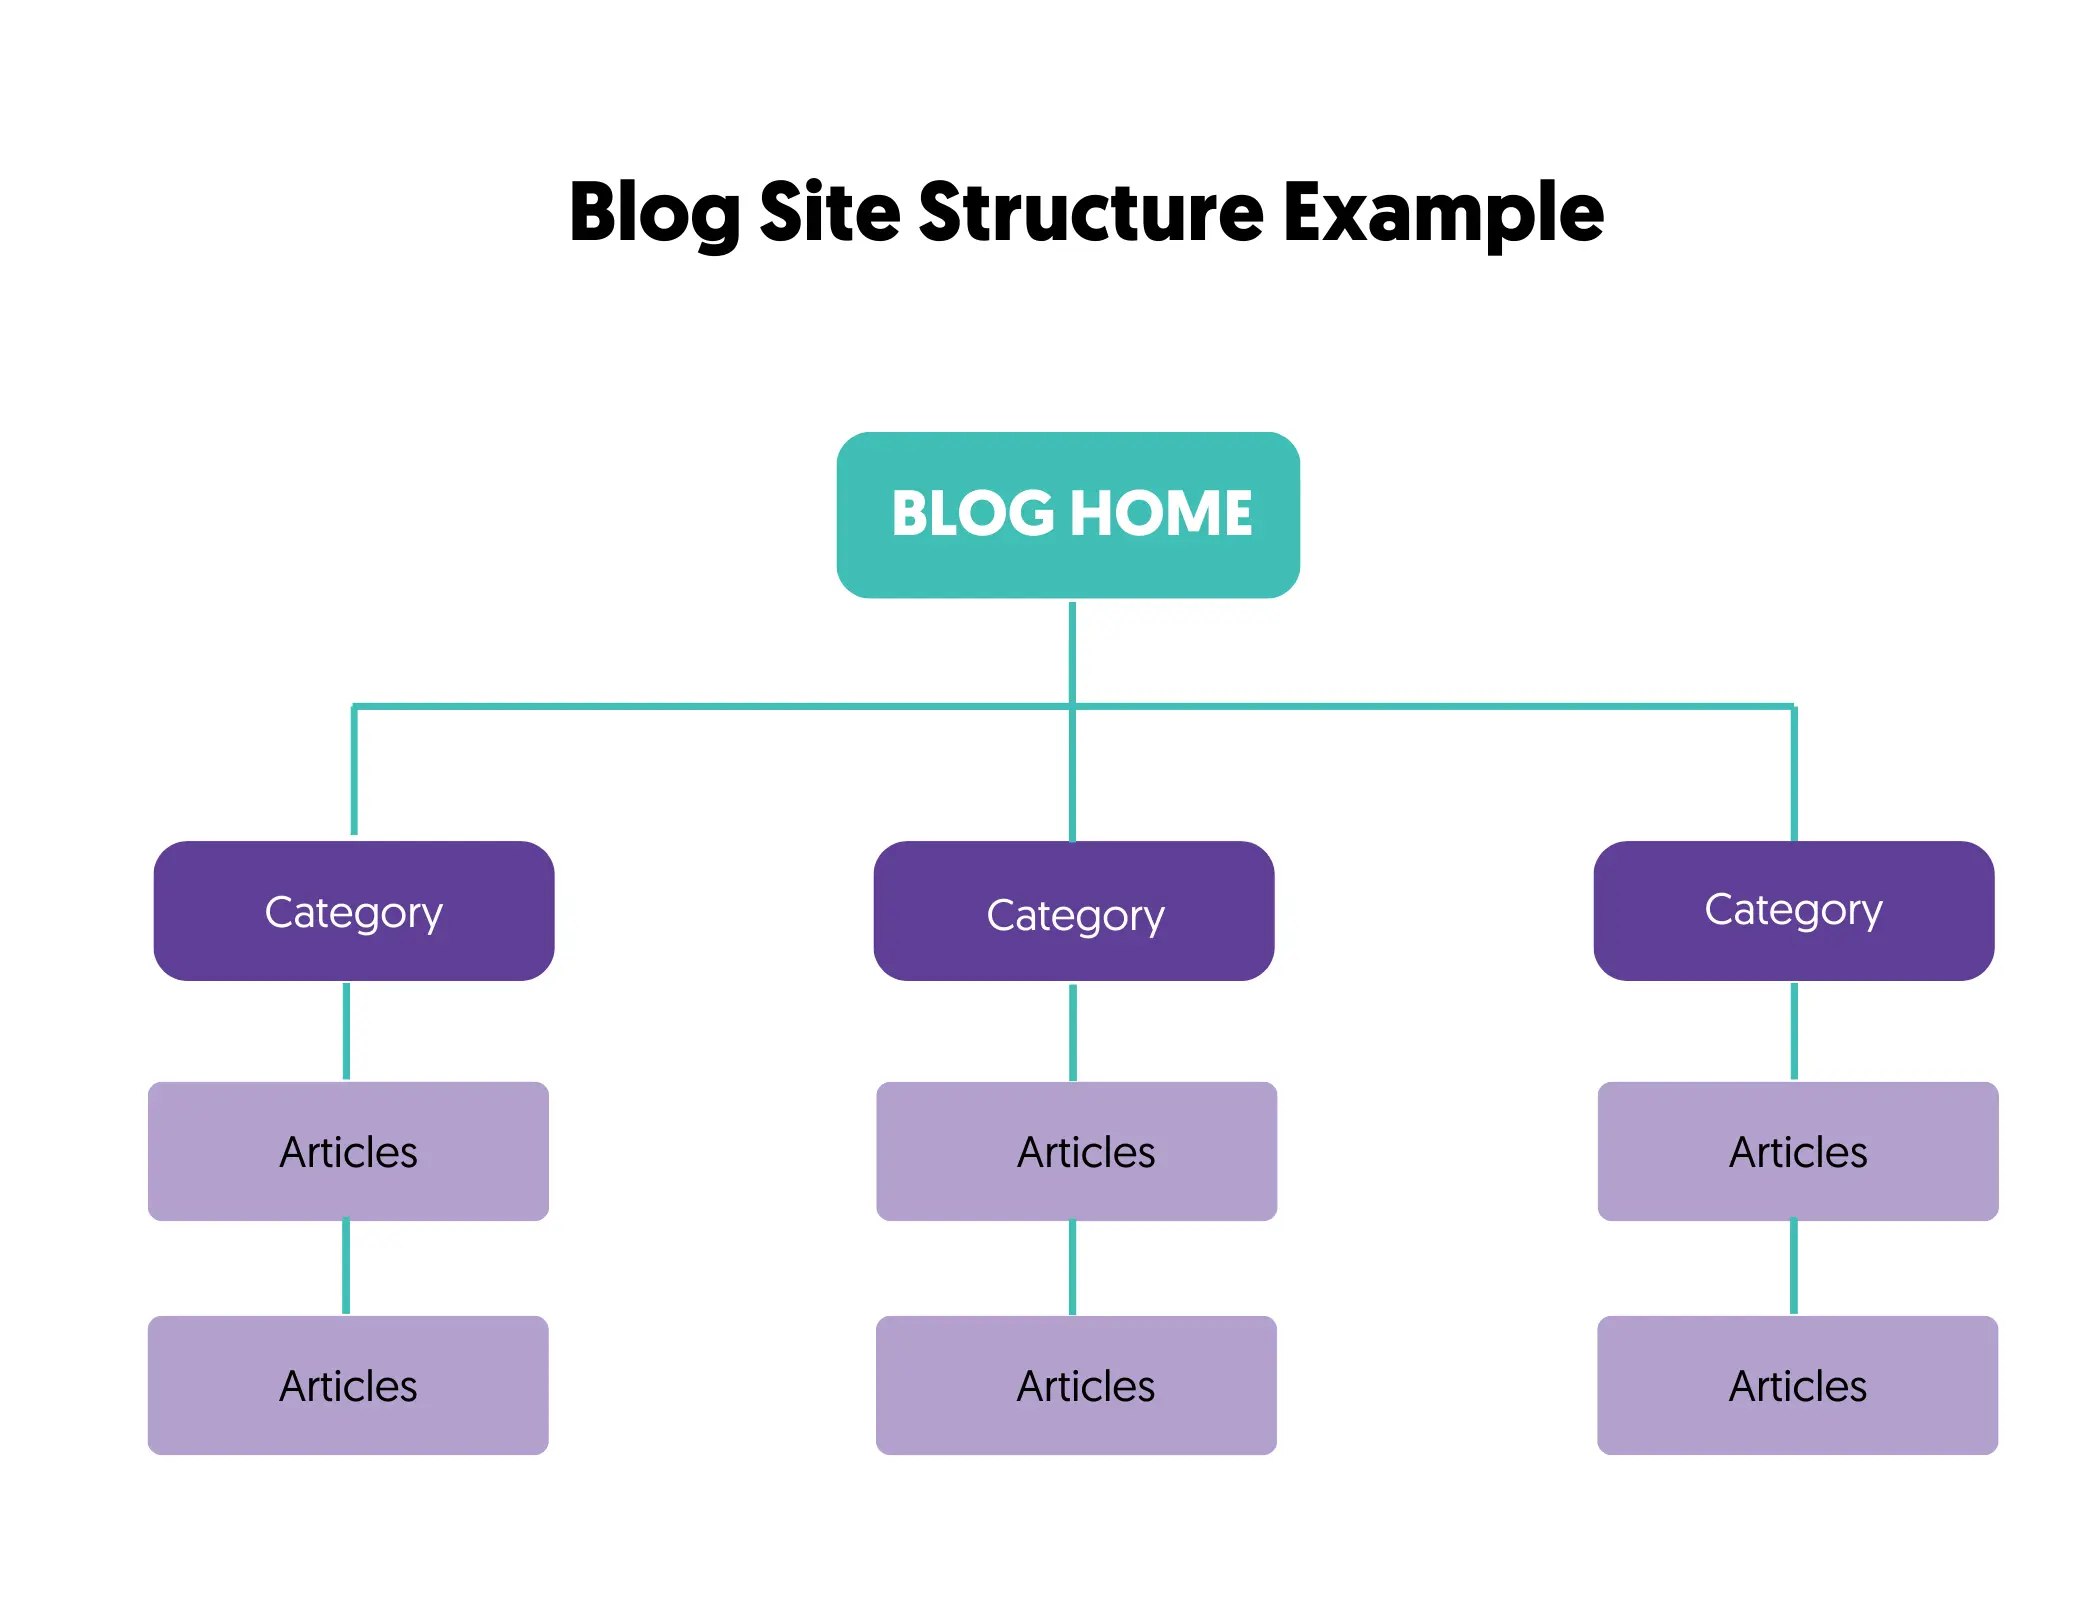 Example of Blog Site Structure